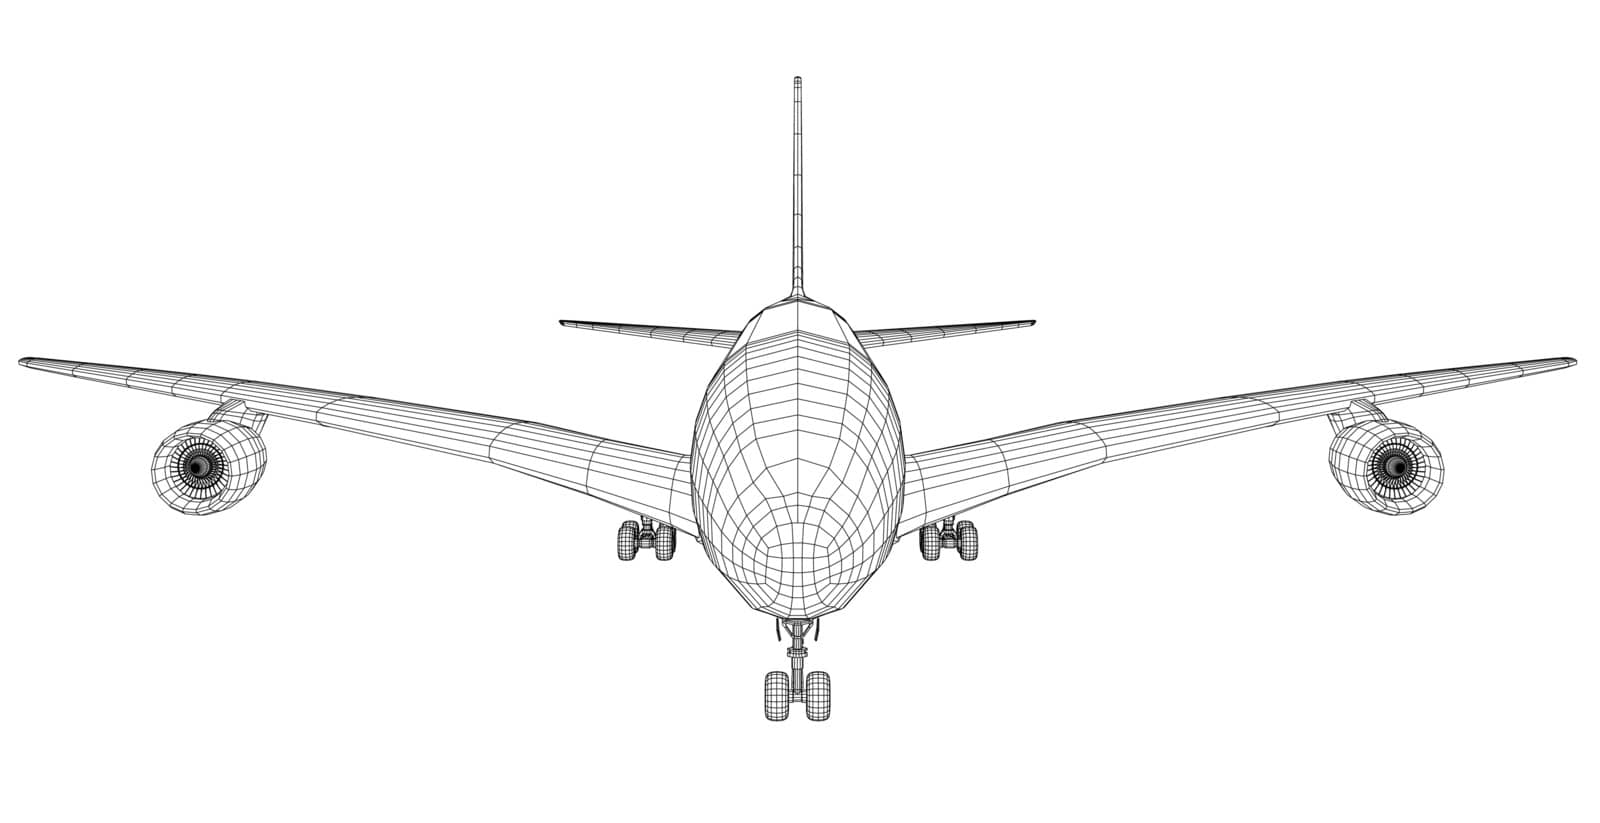 Airplane in wire-frame style. EPS 10 vector format. Vector rendering of 3d